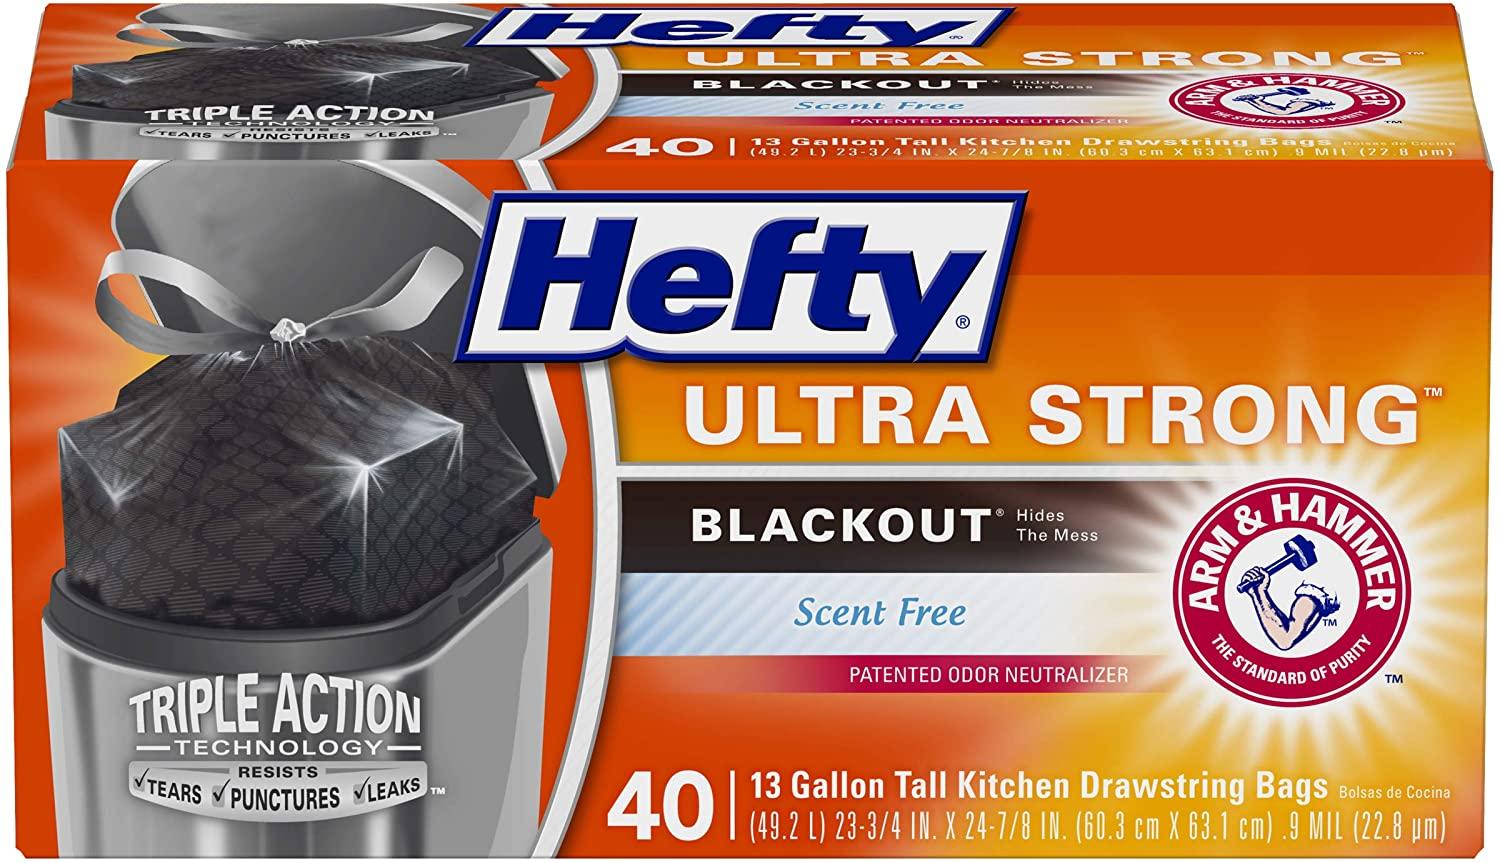 80 Hefty Ultra Strong Tall Kitchen Trash Bags for $11.26 Shipped